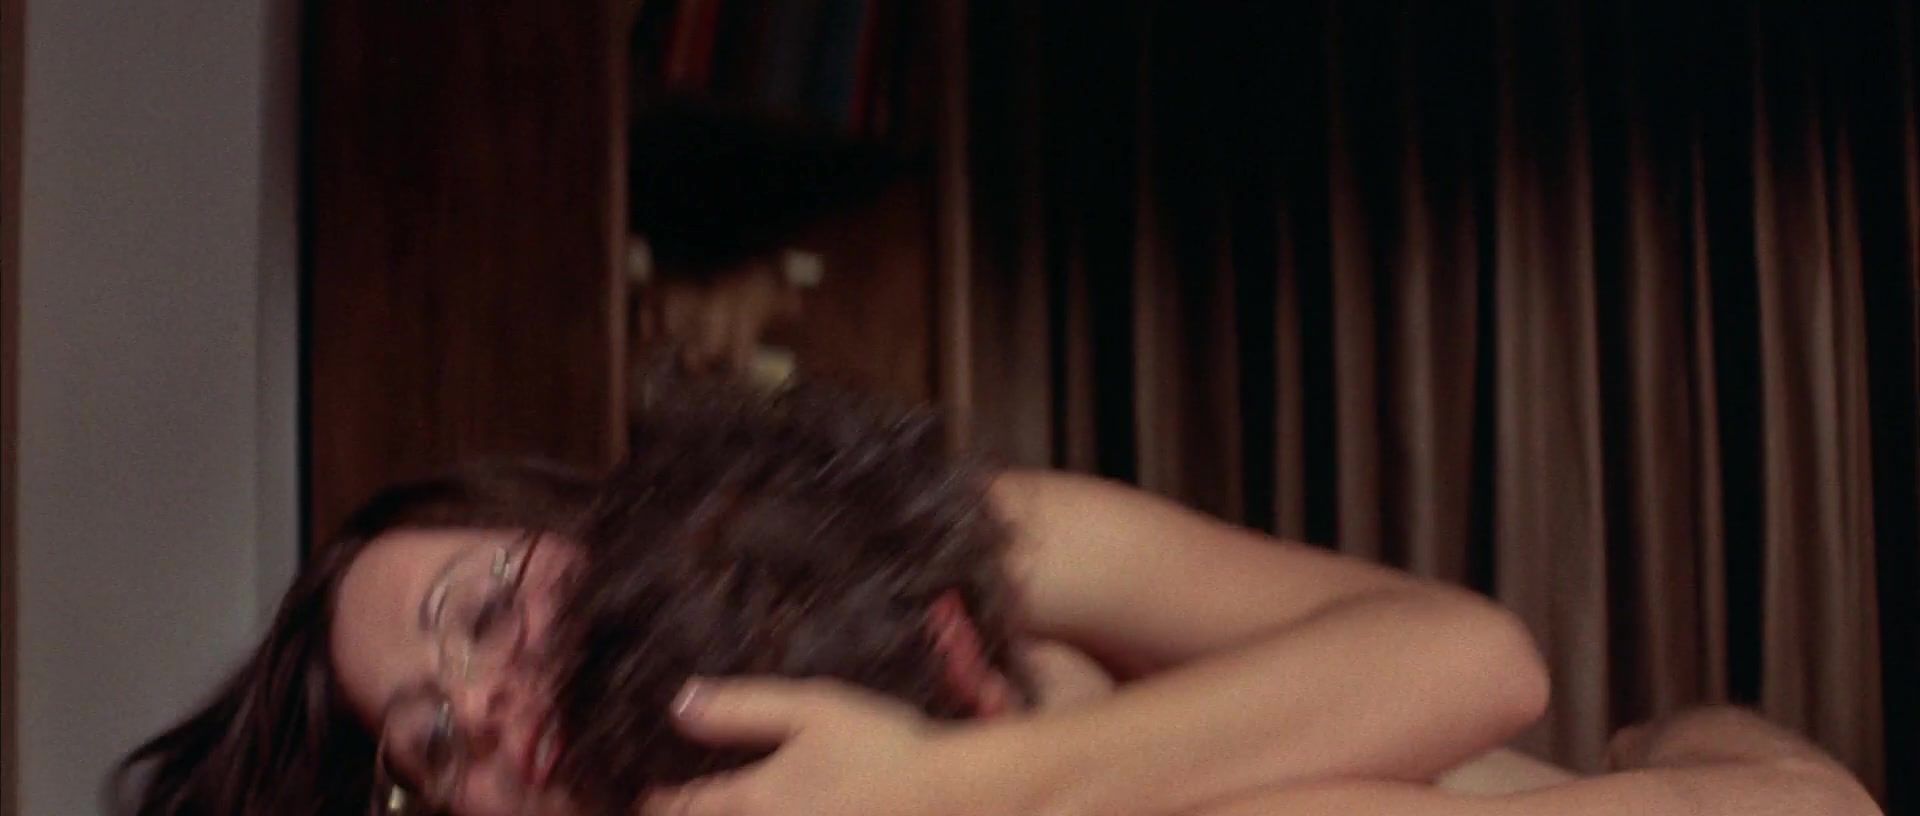 Panties Adrienne Larussa, Hilary Holland nude - The Man Who Fell to Earth (1976) AshleyMadison